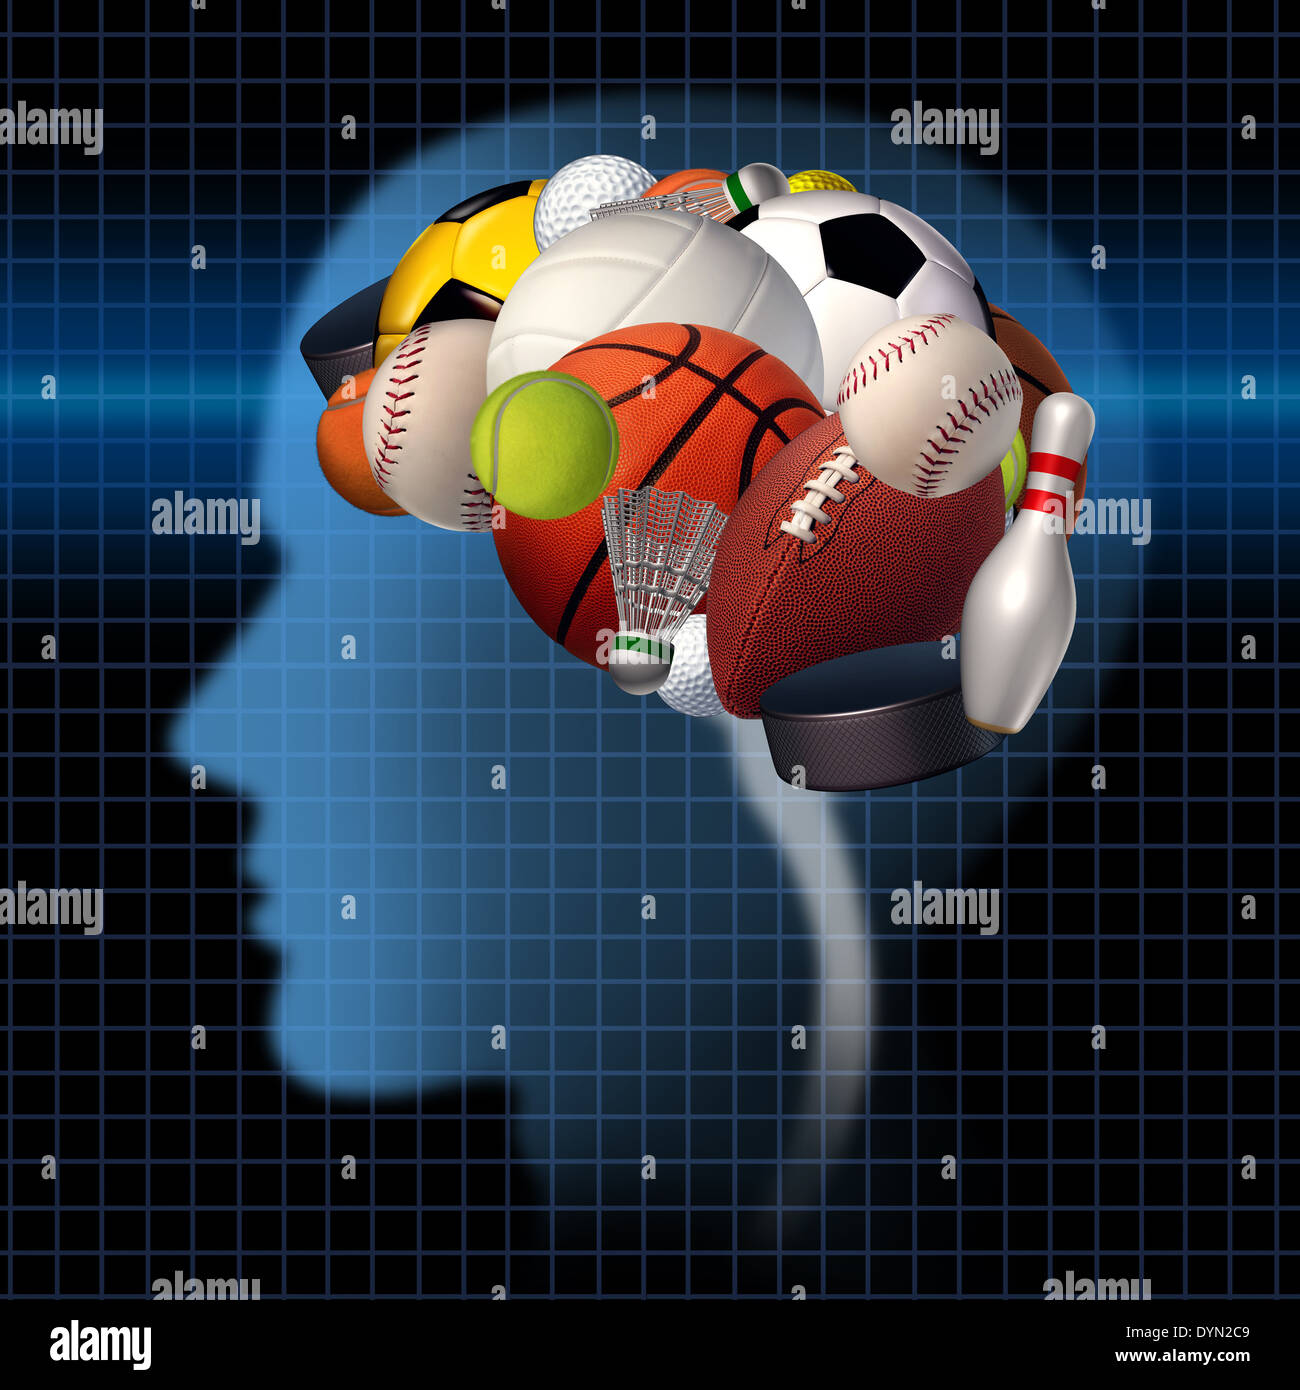 Sport psychology concept as a group of sports equipment shaped as a human brain as a mental health symbol for the relationsip between psychological and physical elements of neurology to improve performance in athletes and treating competitive anxiety,. Stock Photo